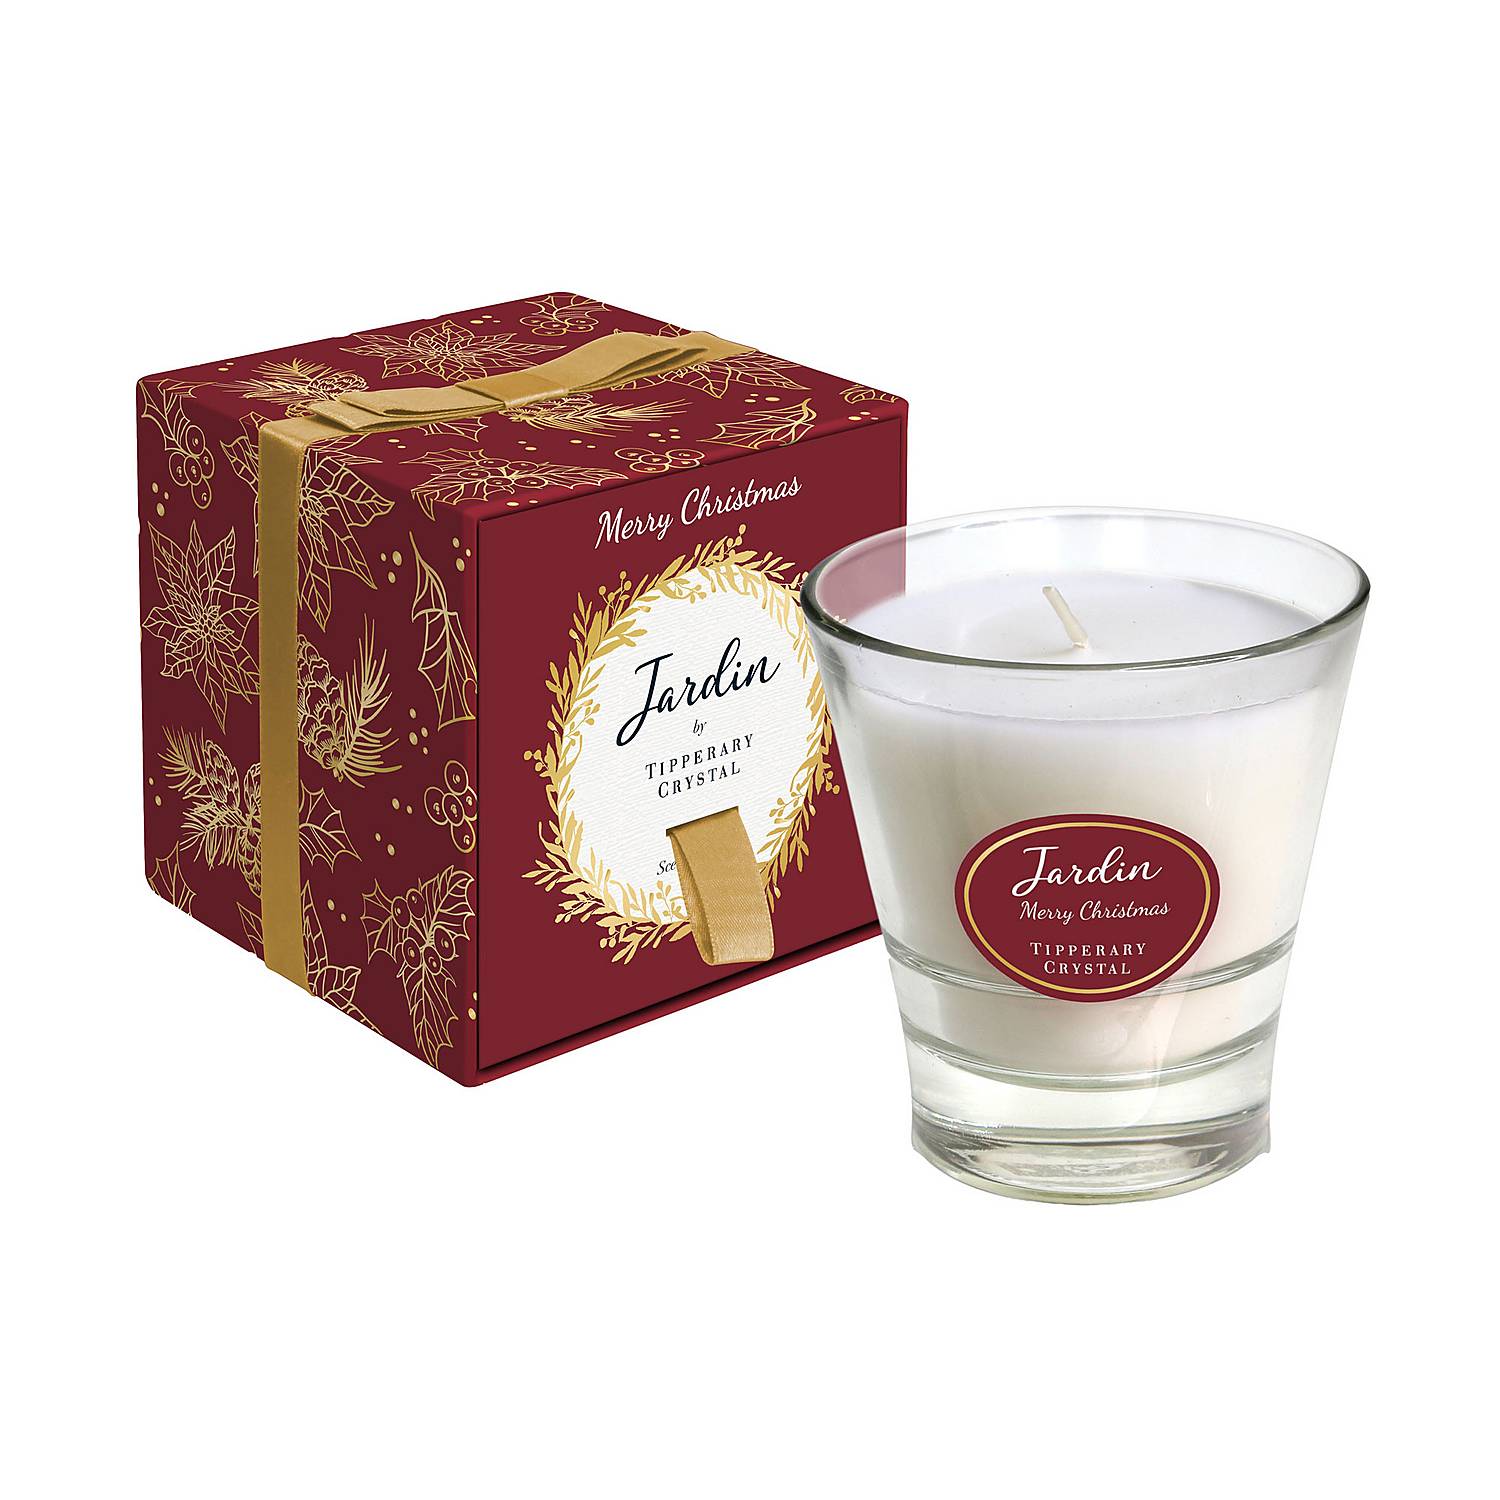 Tipperary Crystal Jardin Merry Christmas Candle 300g